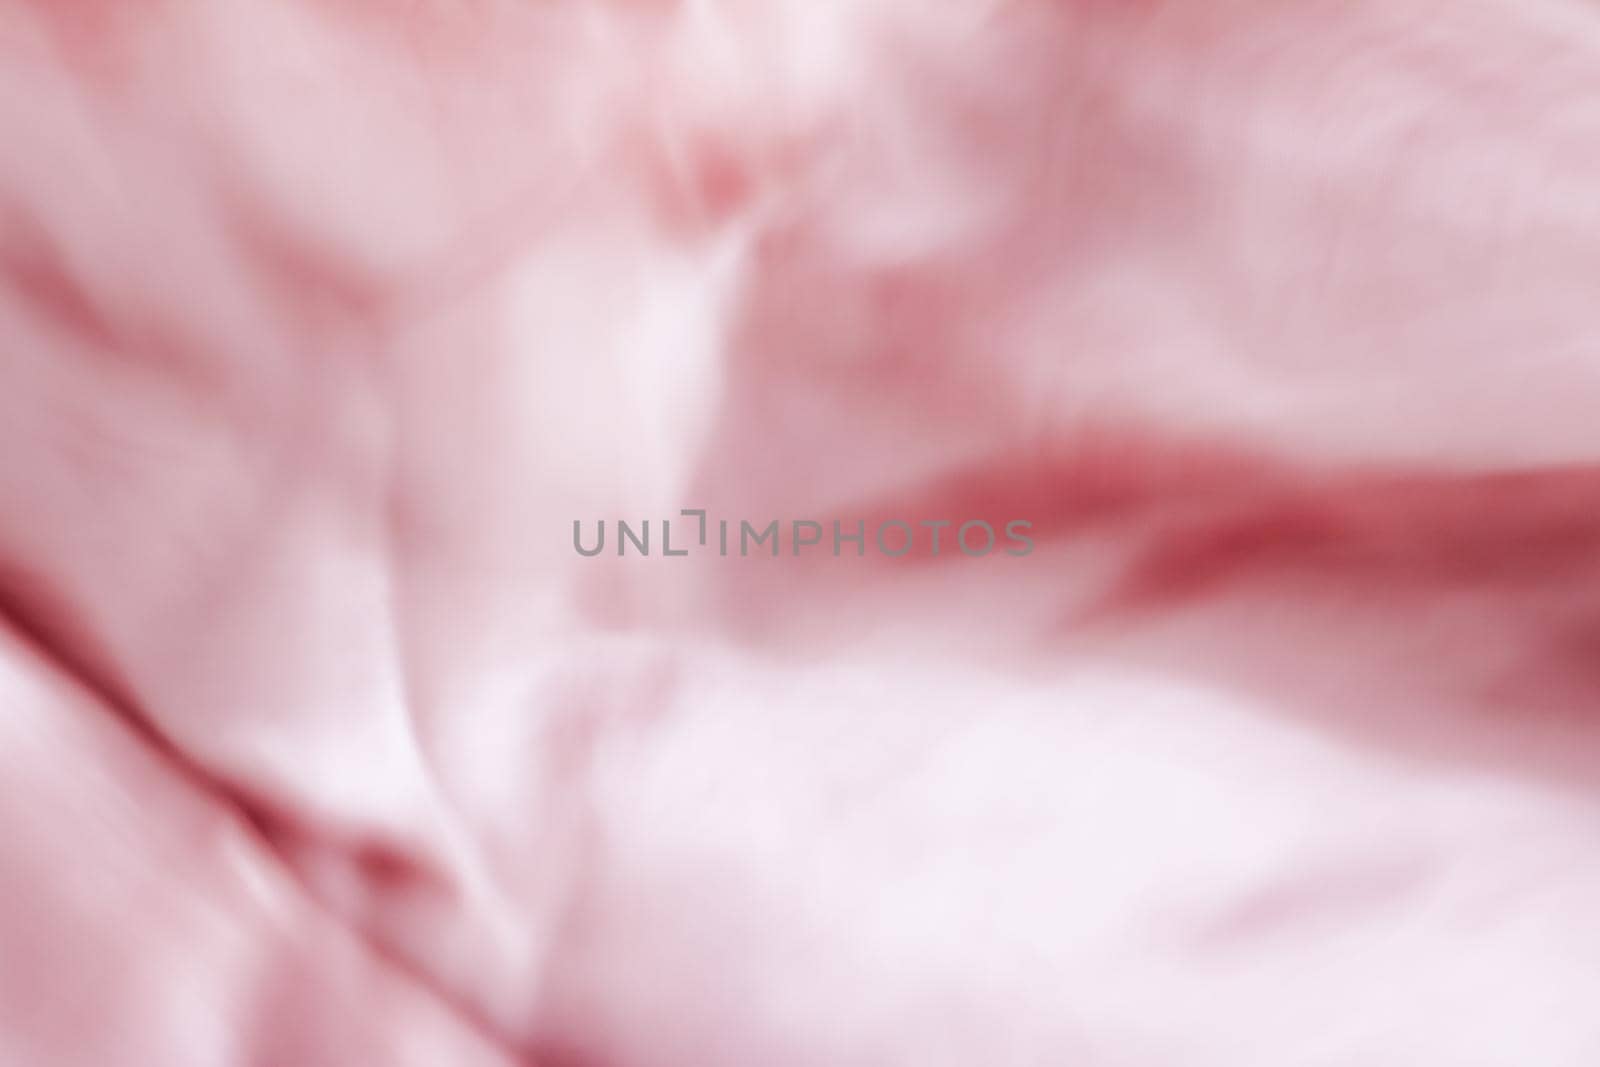 Modern artwork, design in motion and futuristic backdrop concept - Contemporary abstract wall art, pink background